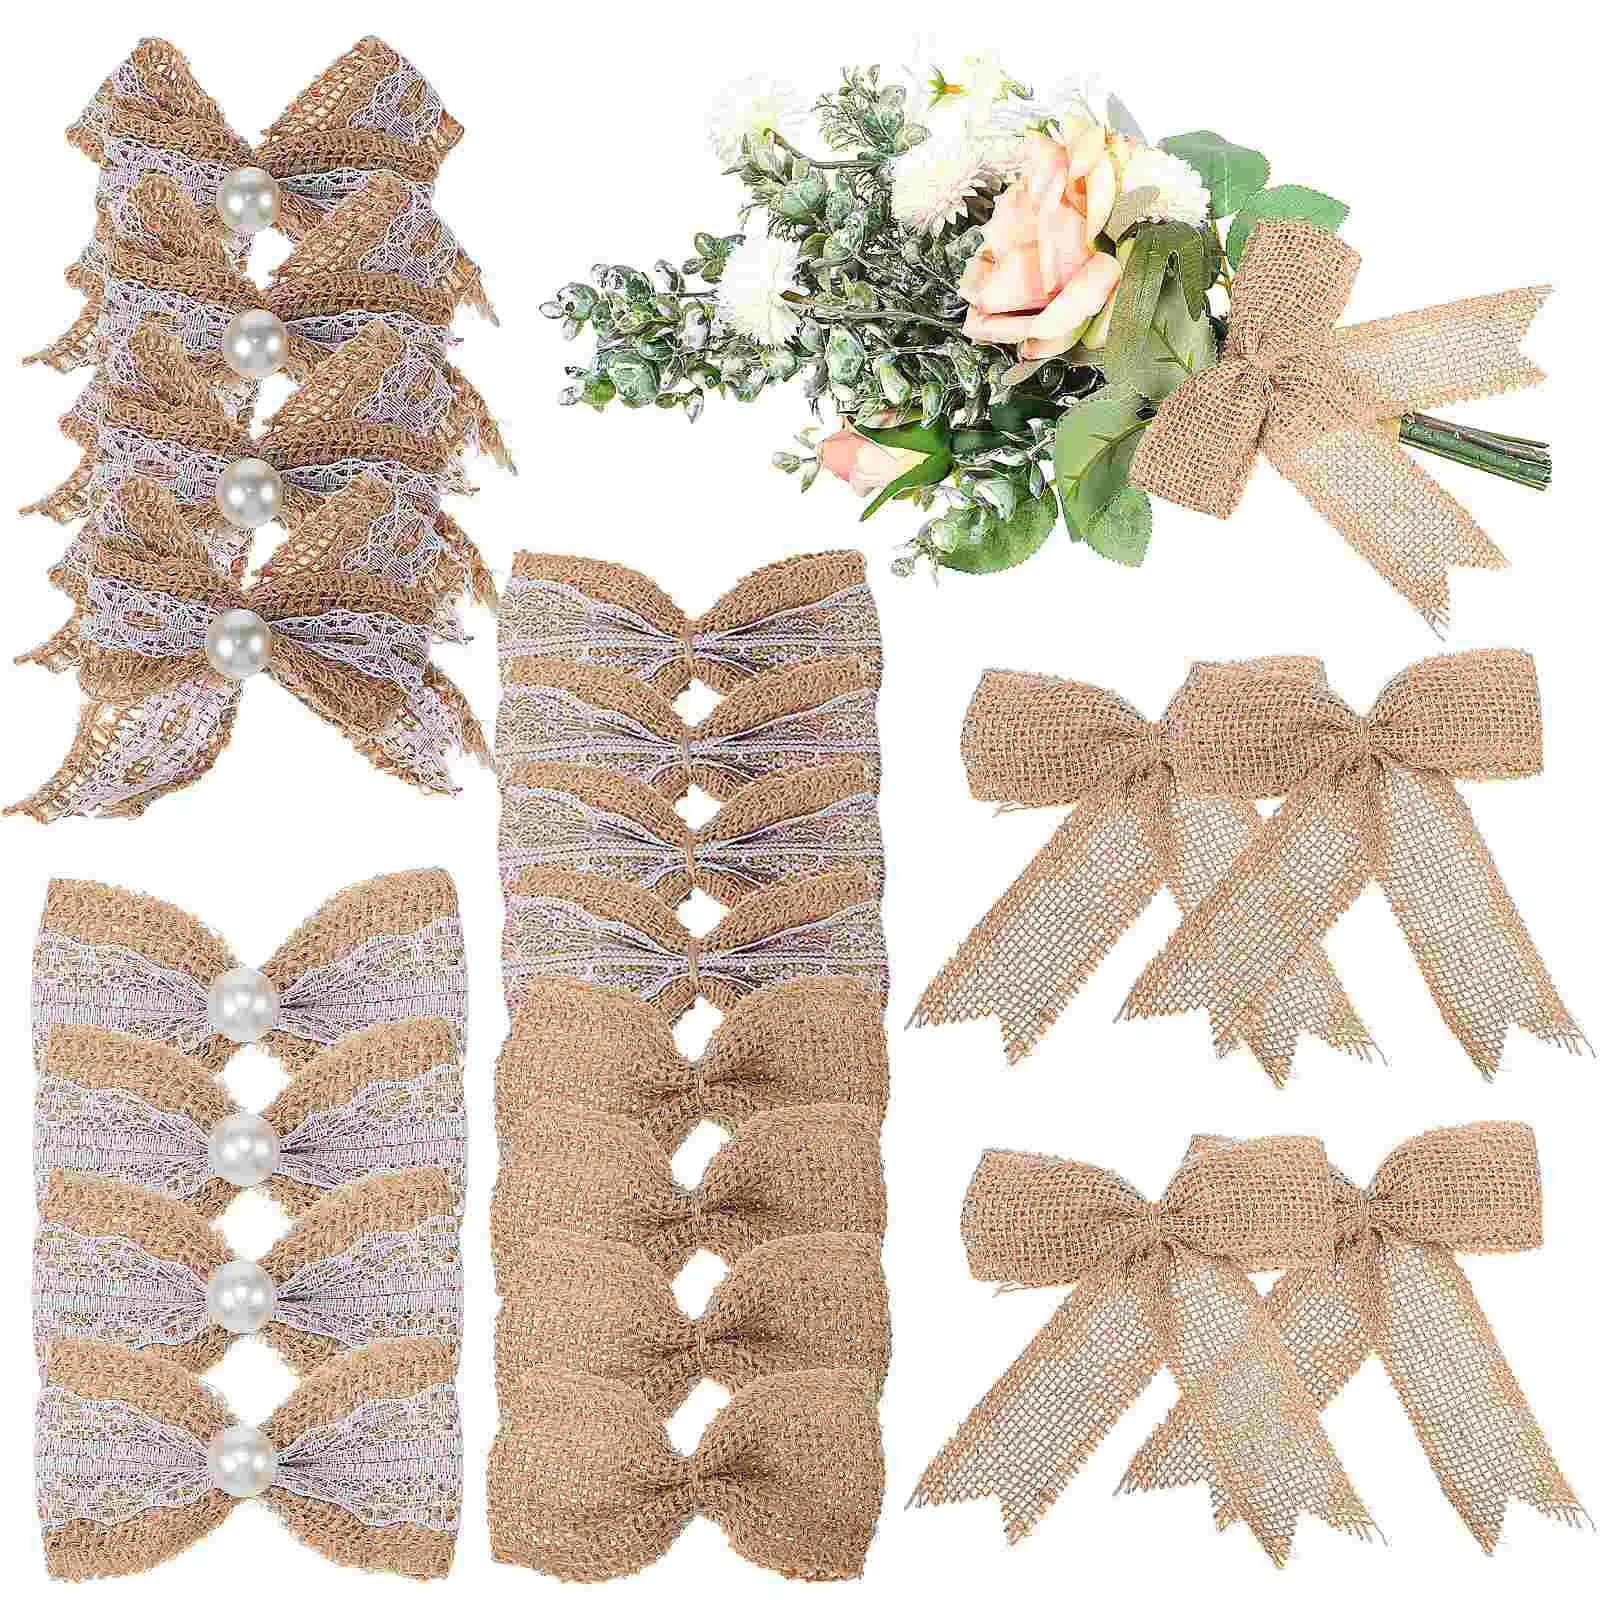 

20 Pcs Beads Mini Burlap Bows For Crafts Wrapping Twine Linen Christmas Tree Decors